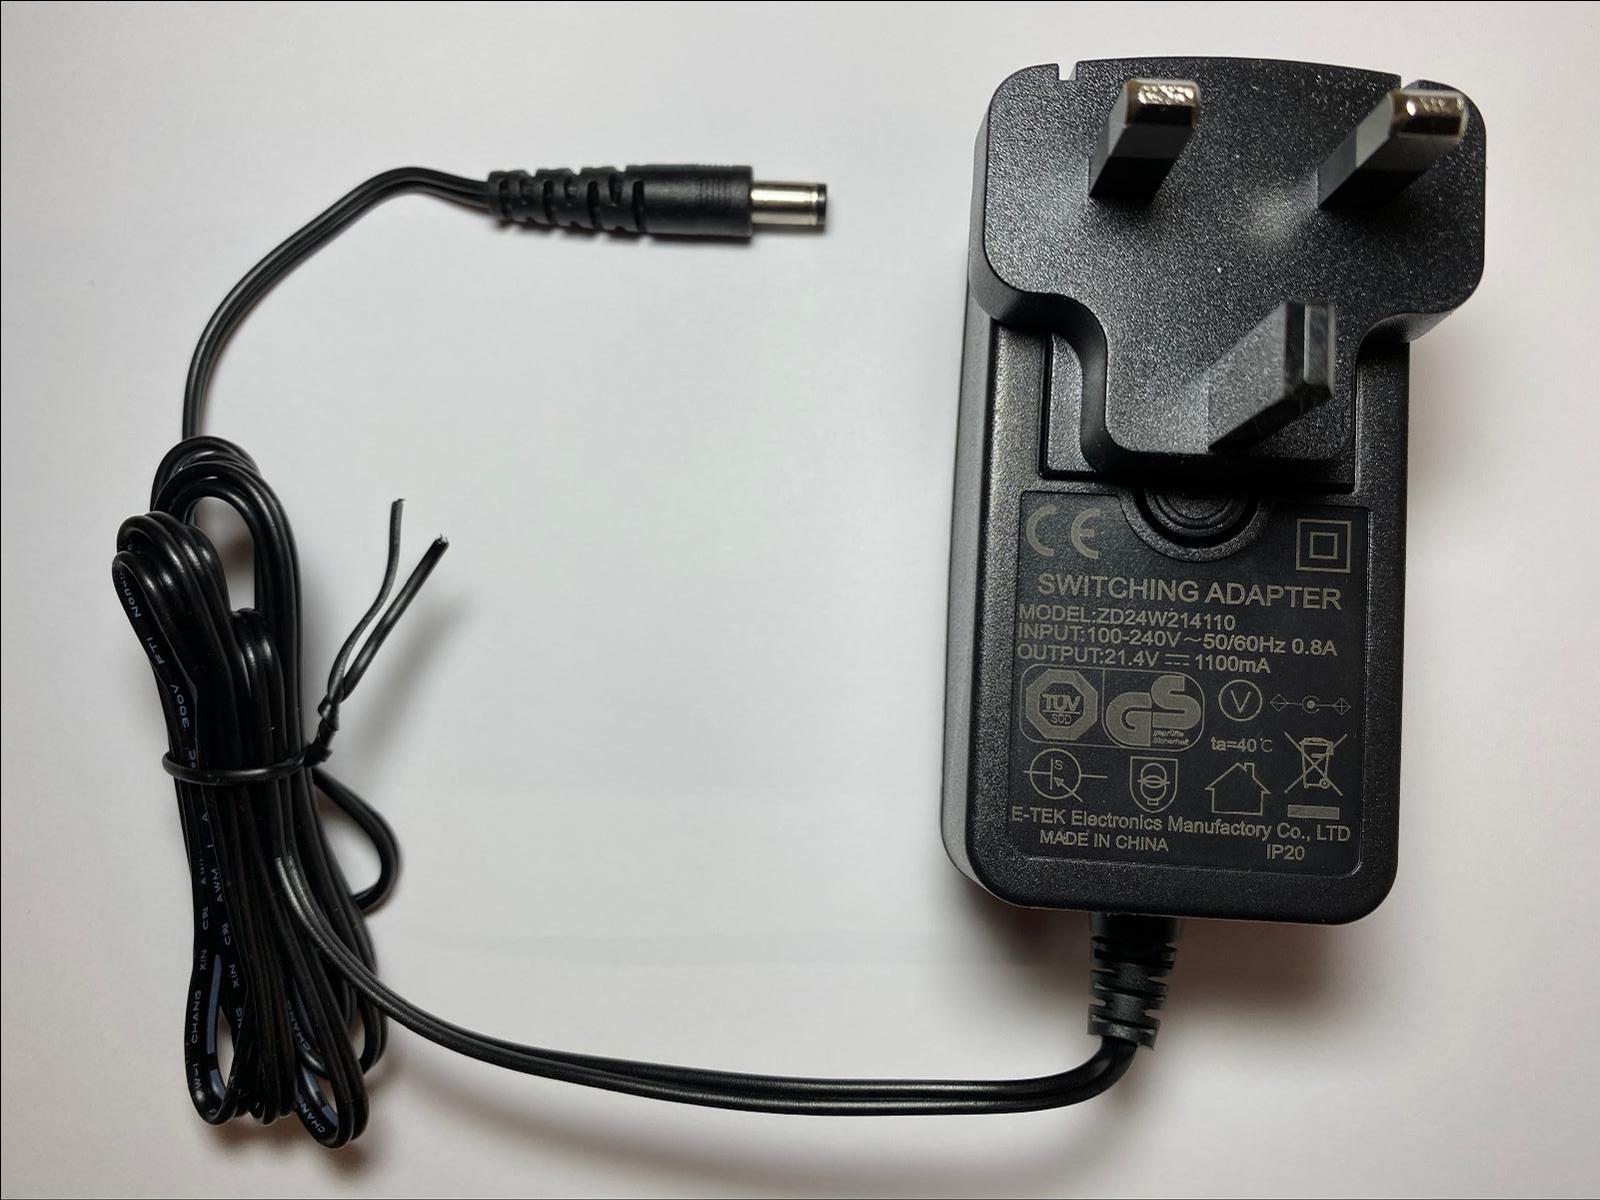 Replacement for Kingpro Ac Adapter KAD-0105012E 5V 2.0A Power Supply MPN: K3-5VJM EAN: Does not apply Type: Switching A